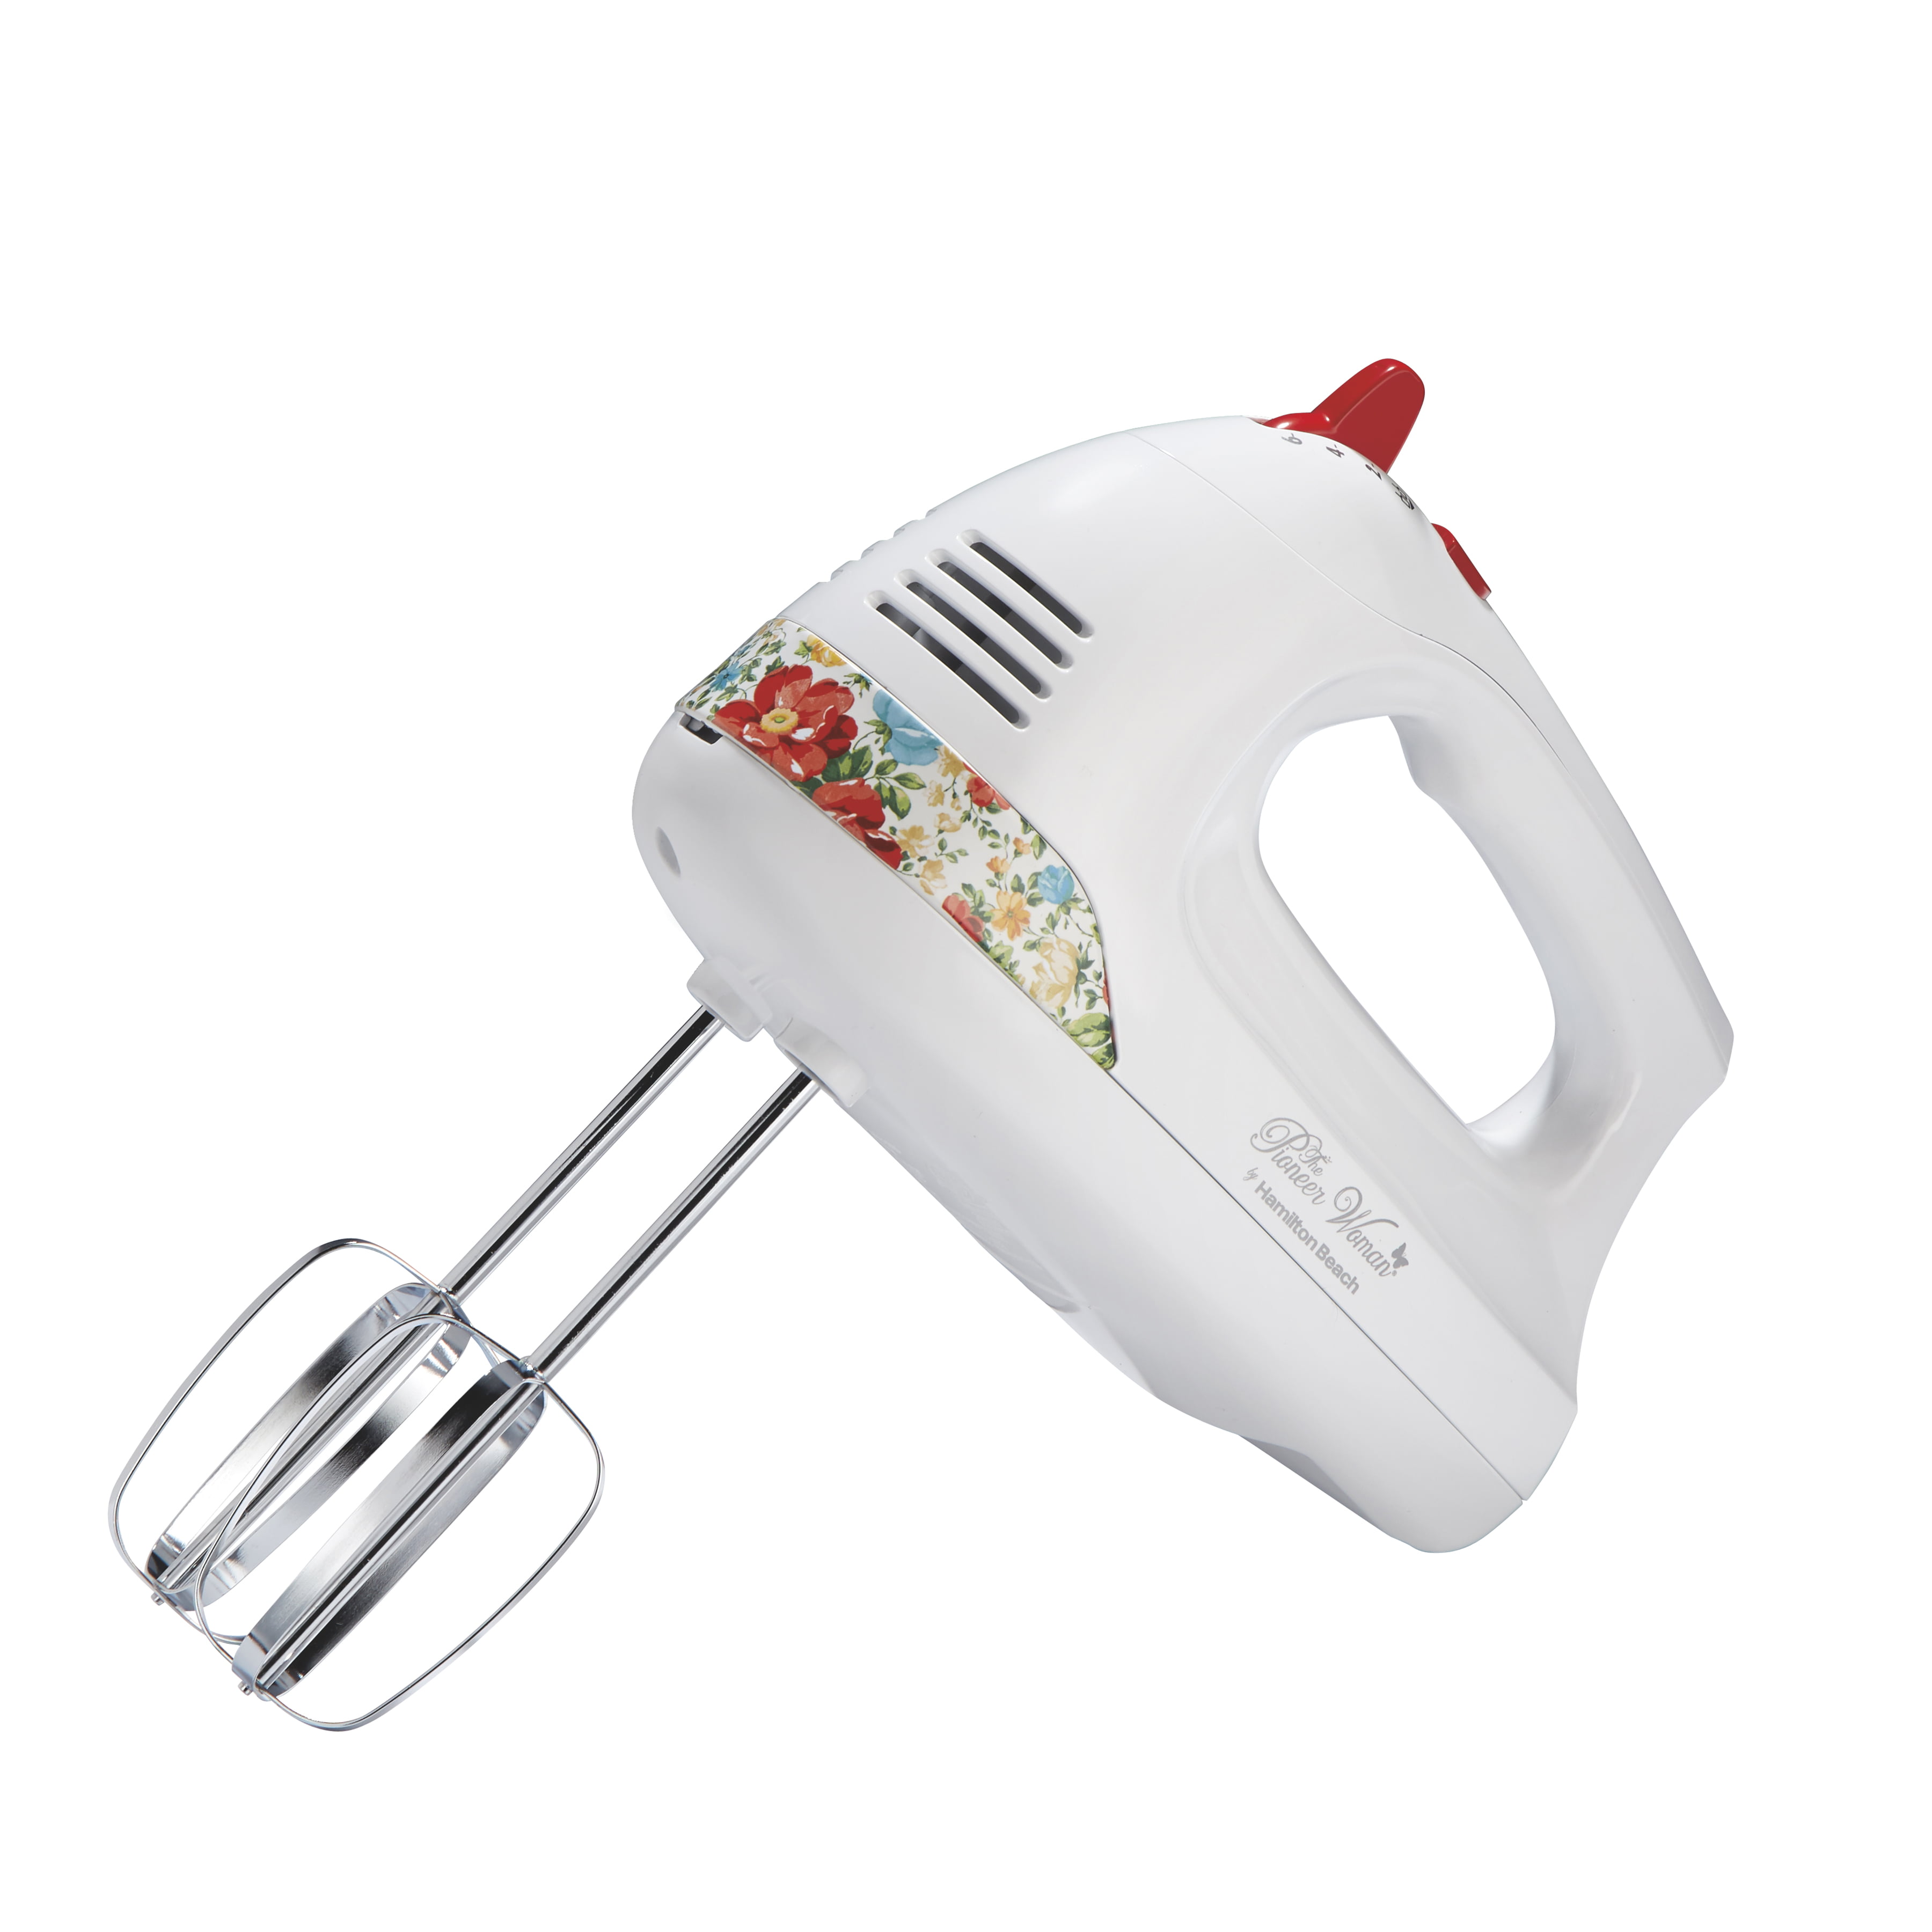 Pioneer Woman floral hand mixer is on sale for 50% off at Walmart